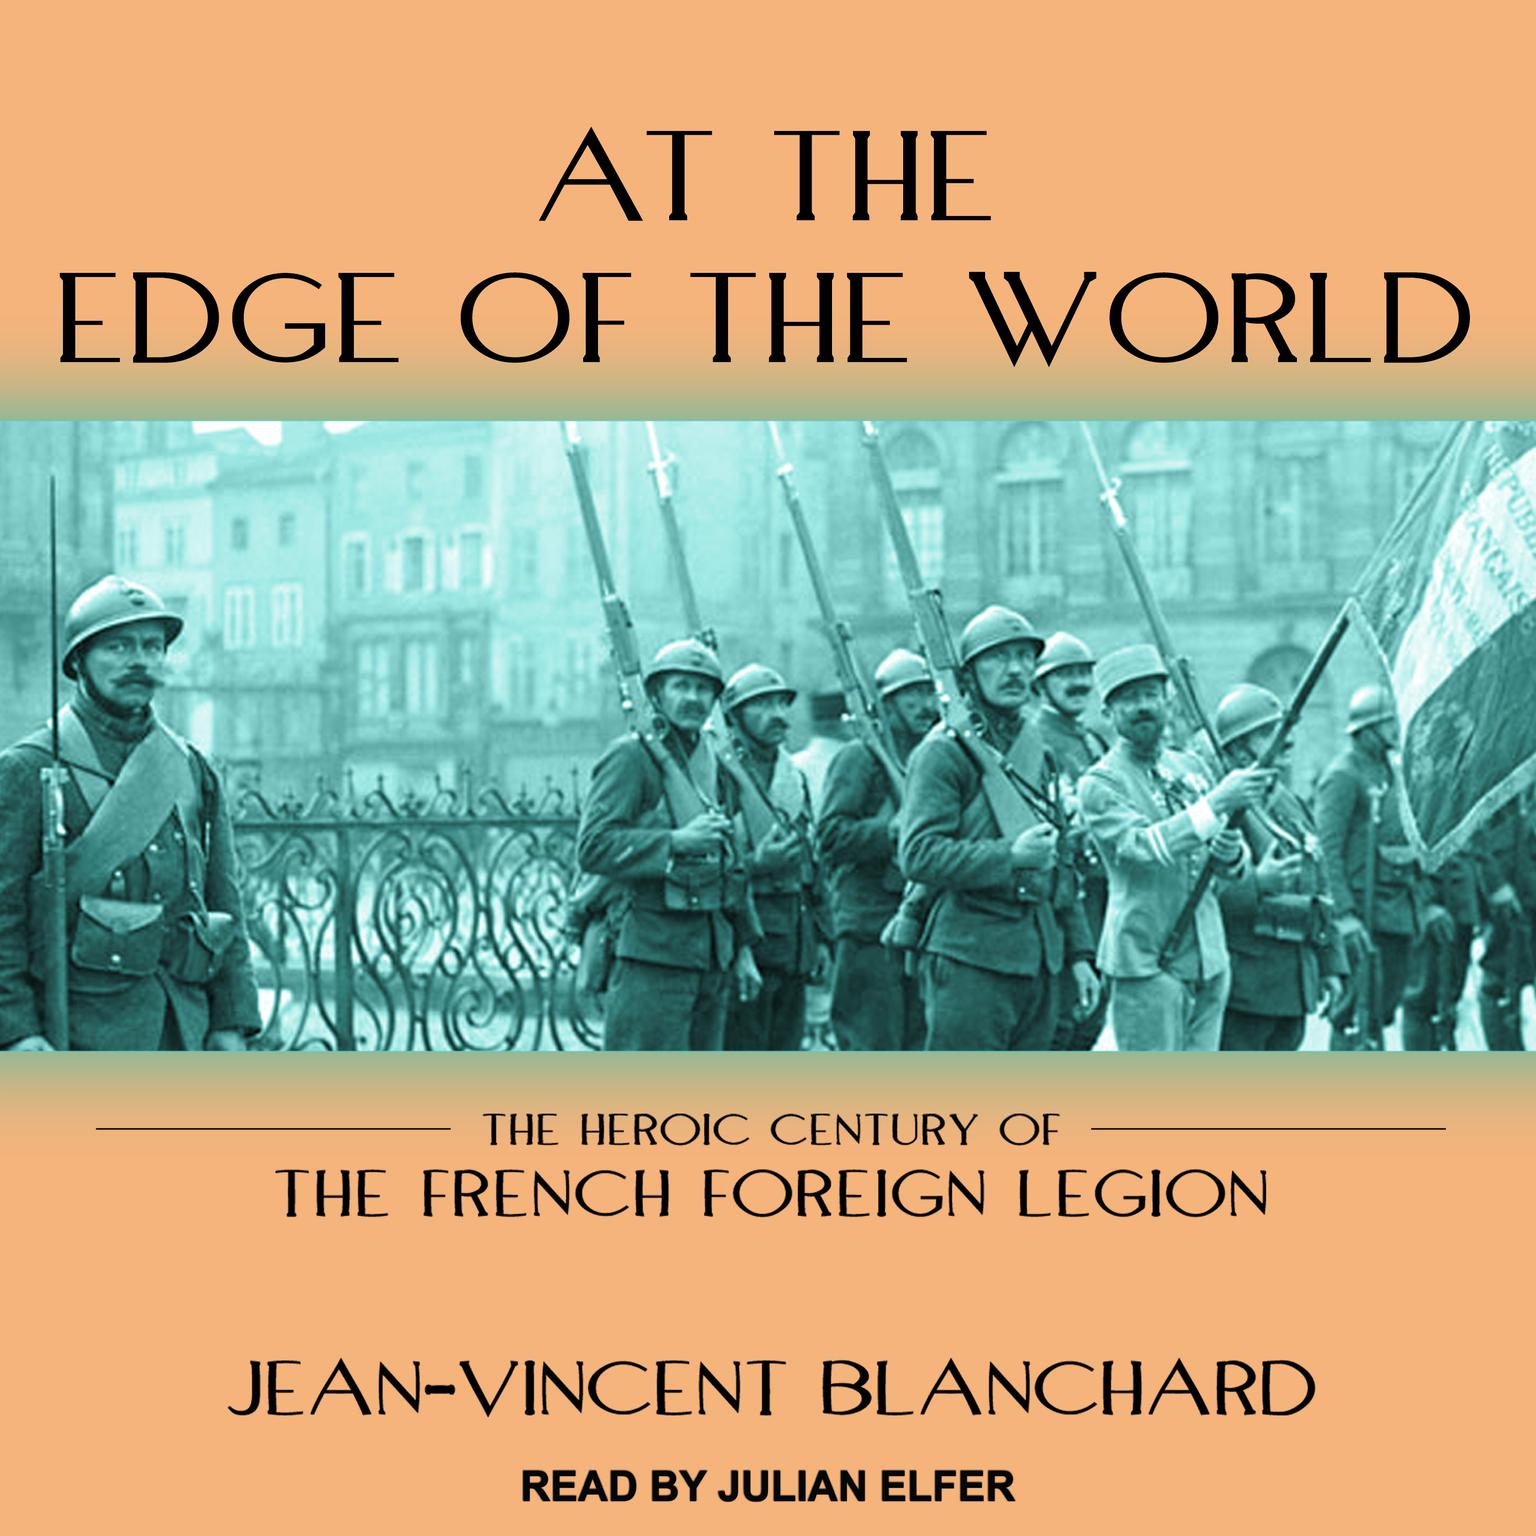 At the Edge of the World: The Heroic Century of the French Foreign Legion Audiobook, by Jean-Vincent Blanchard